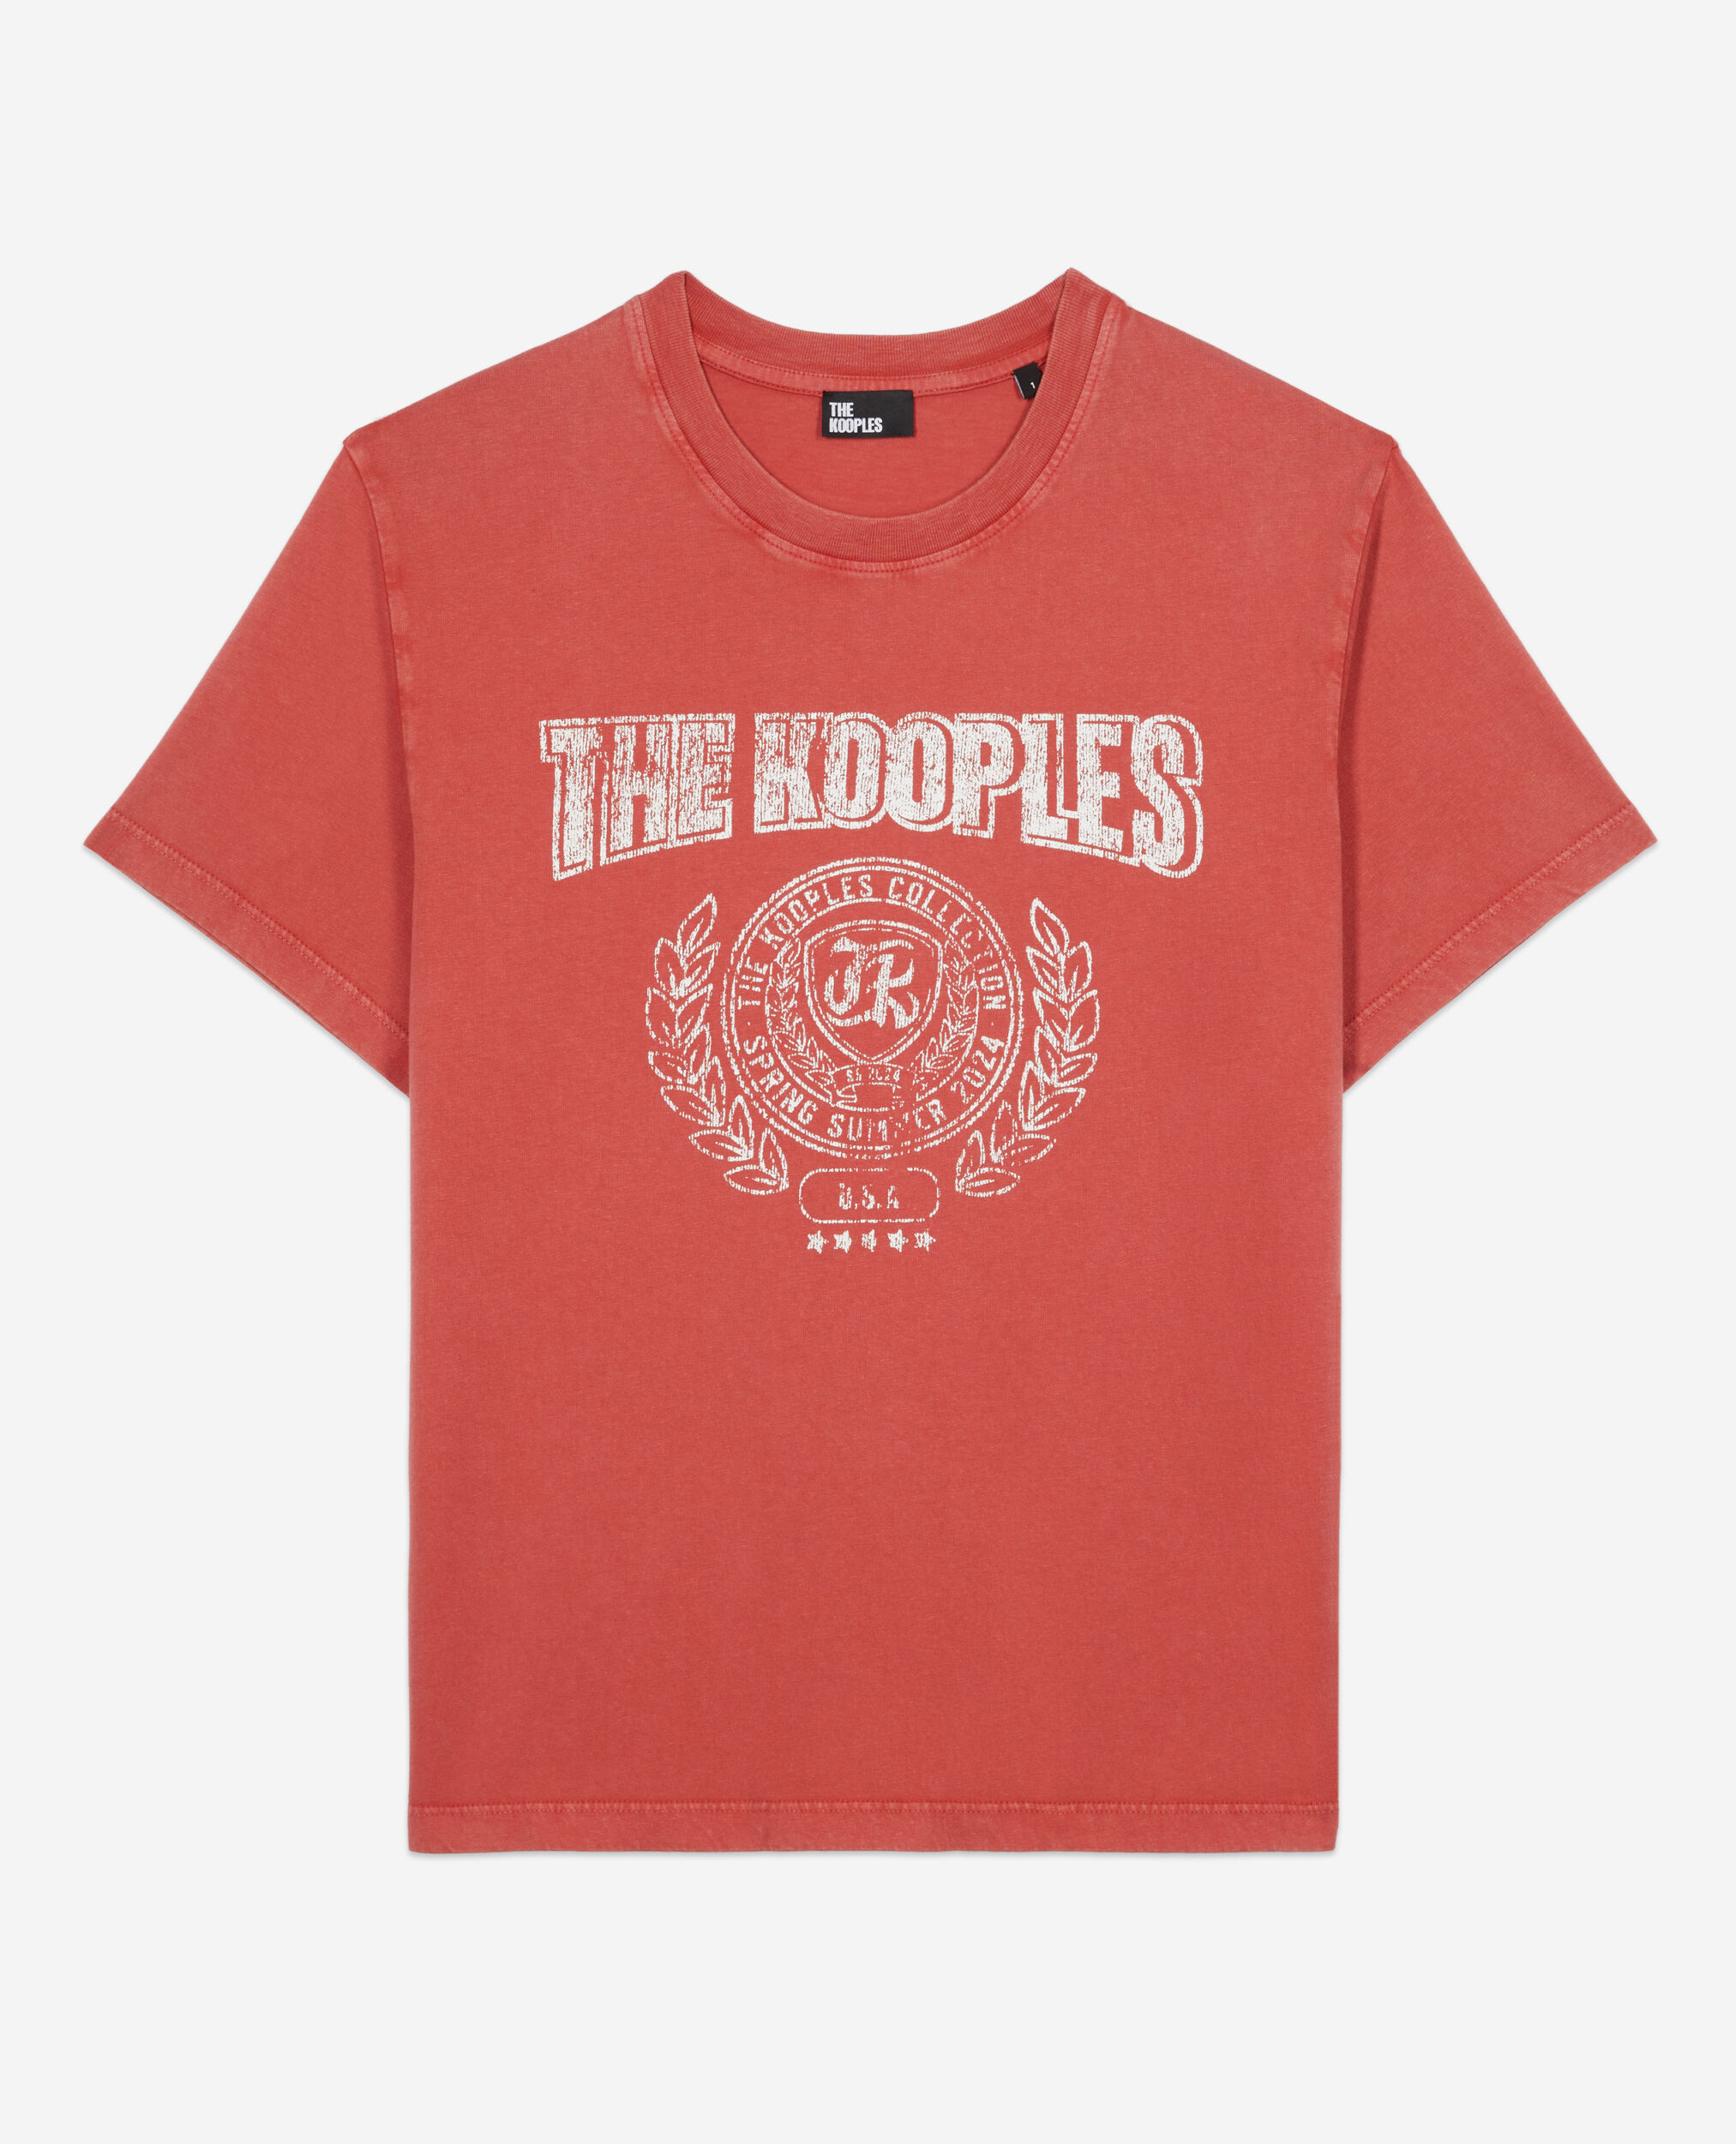 Rotes T-Shirt mit Wappen-Siebdruck, RED BRIQUE, hi-res image number null